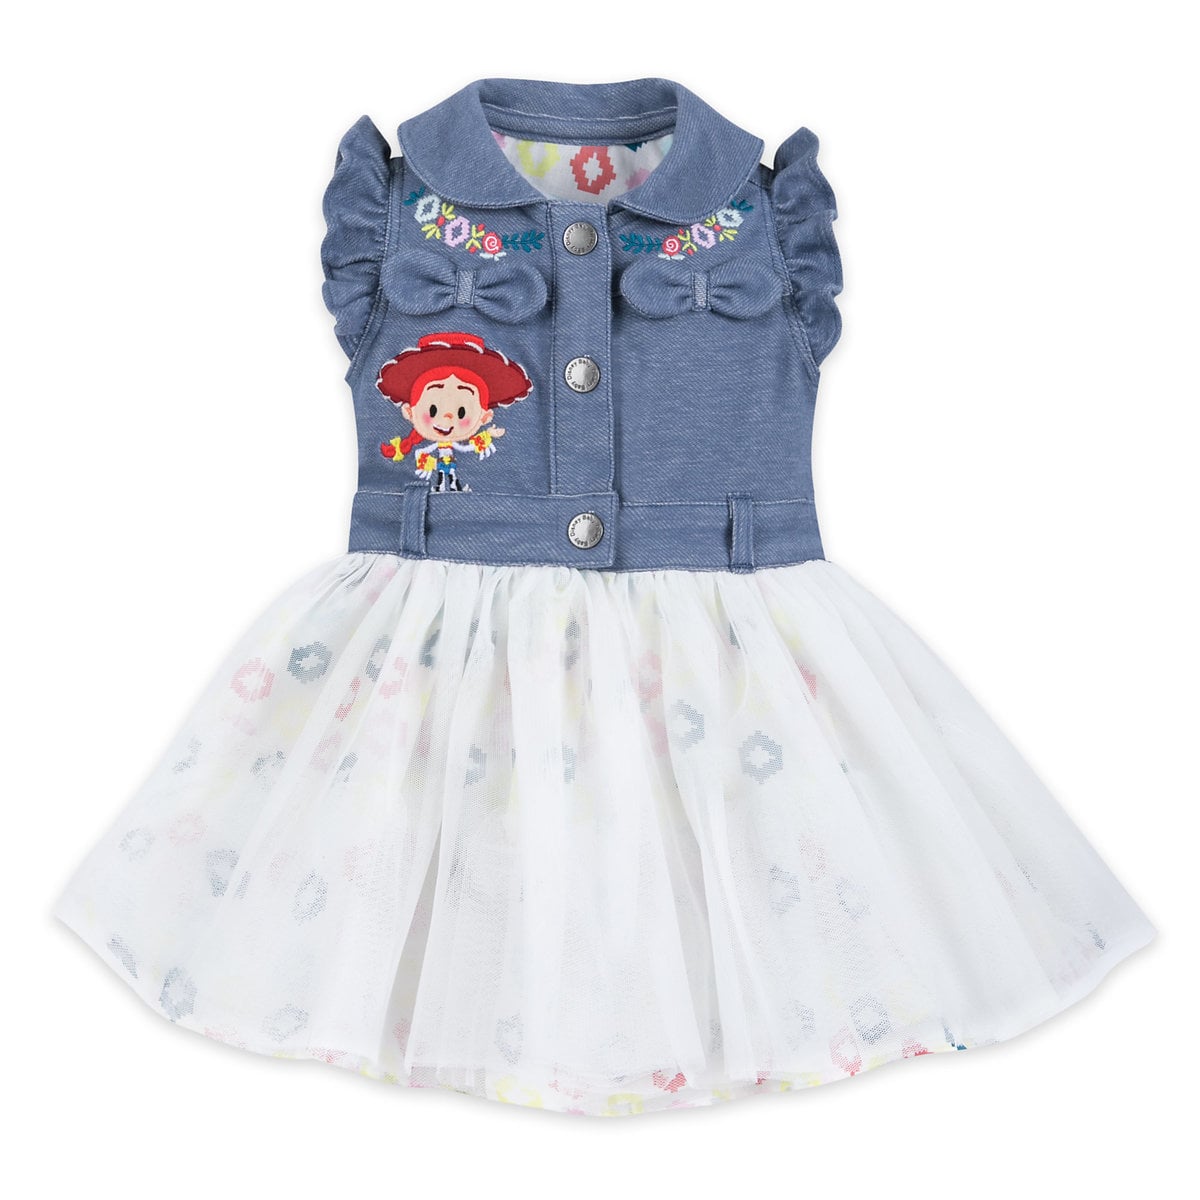 Top 25 Disney Gift Ideas for Babies featured by top US Disney blogger, Marcie and the Mouse: This Toy Story dress for babies is adorable